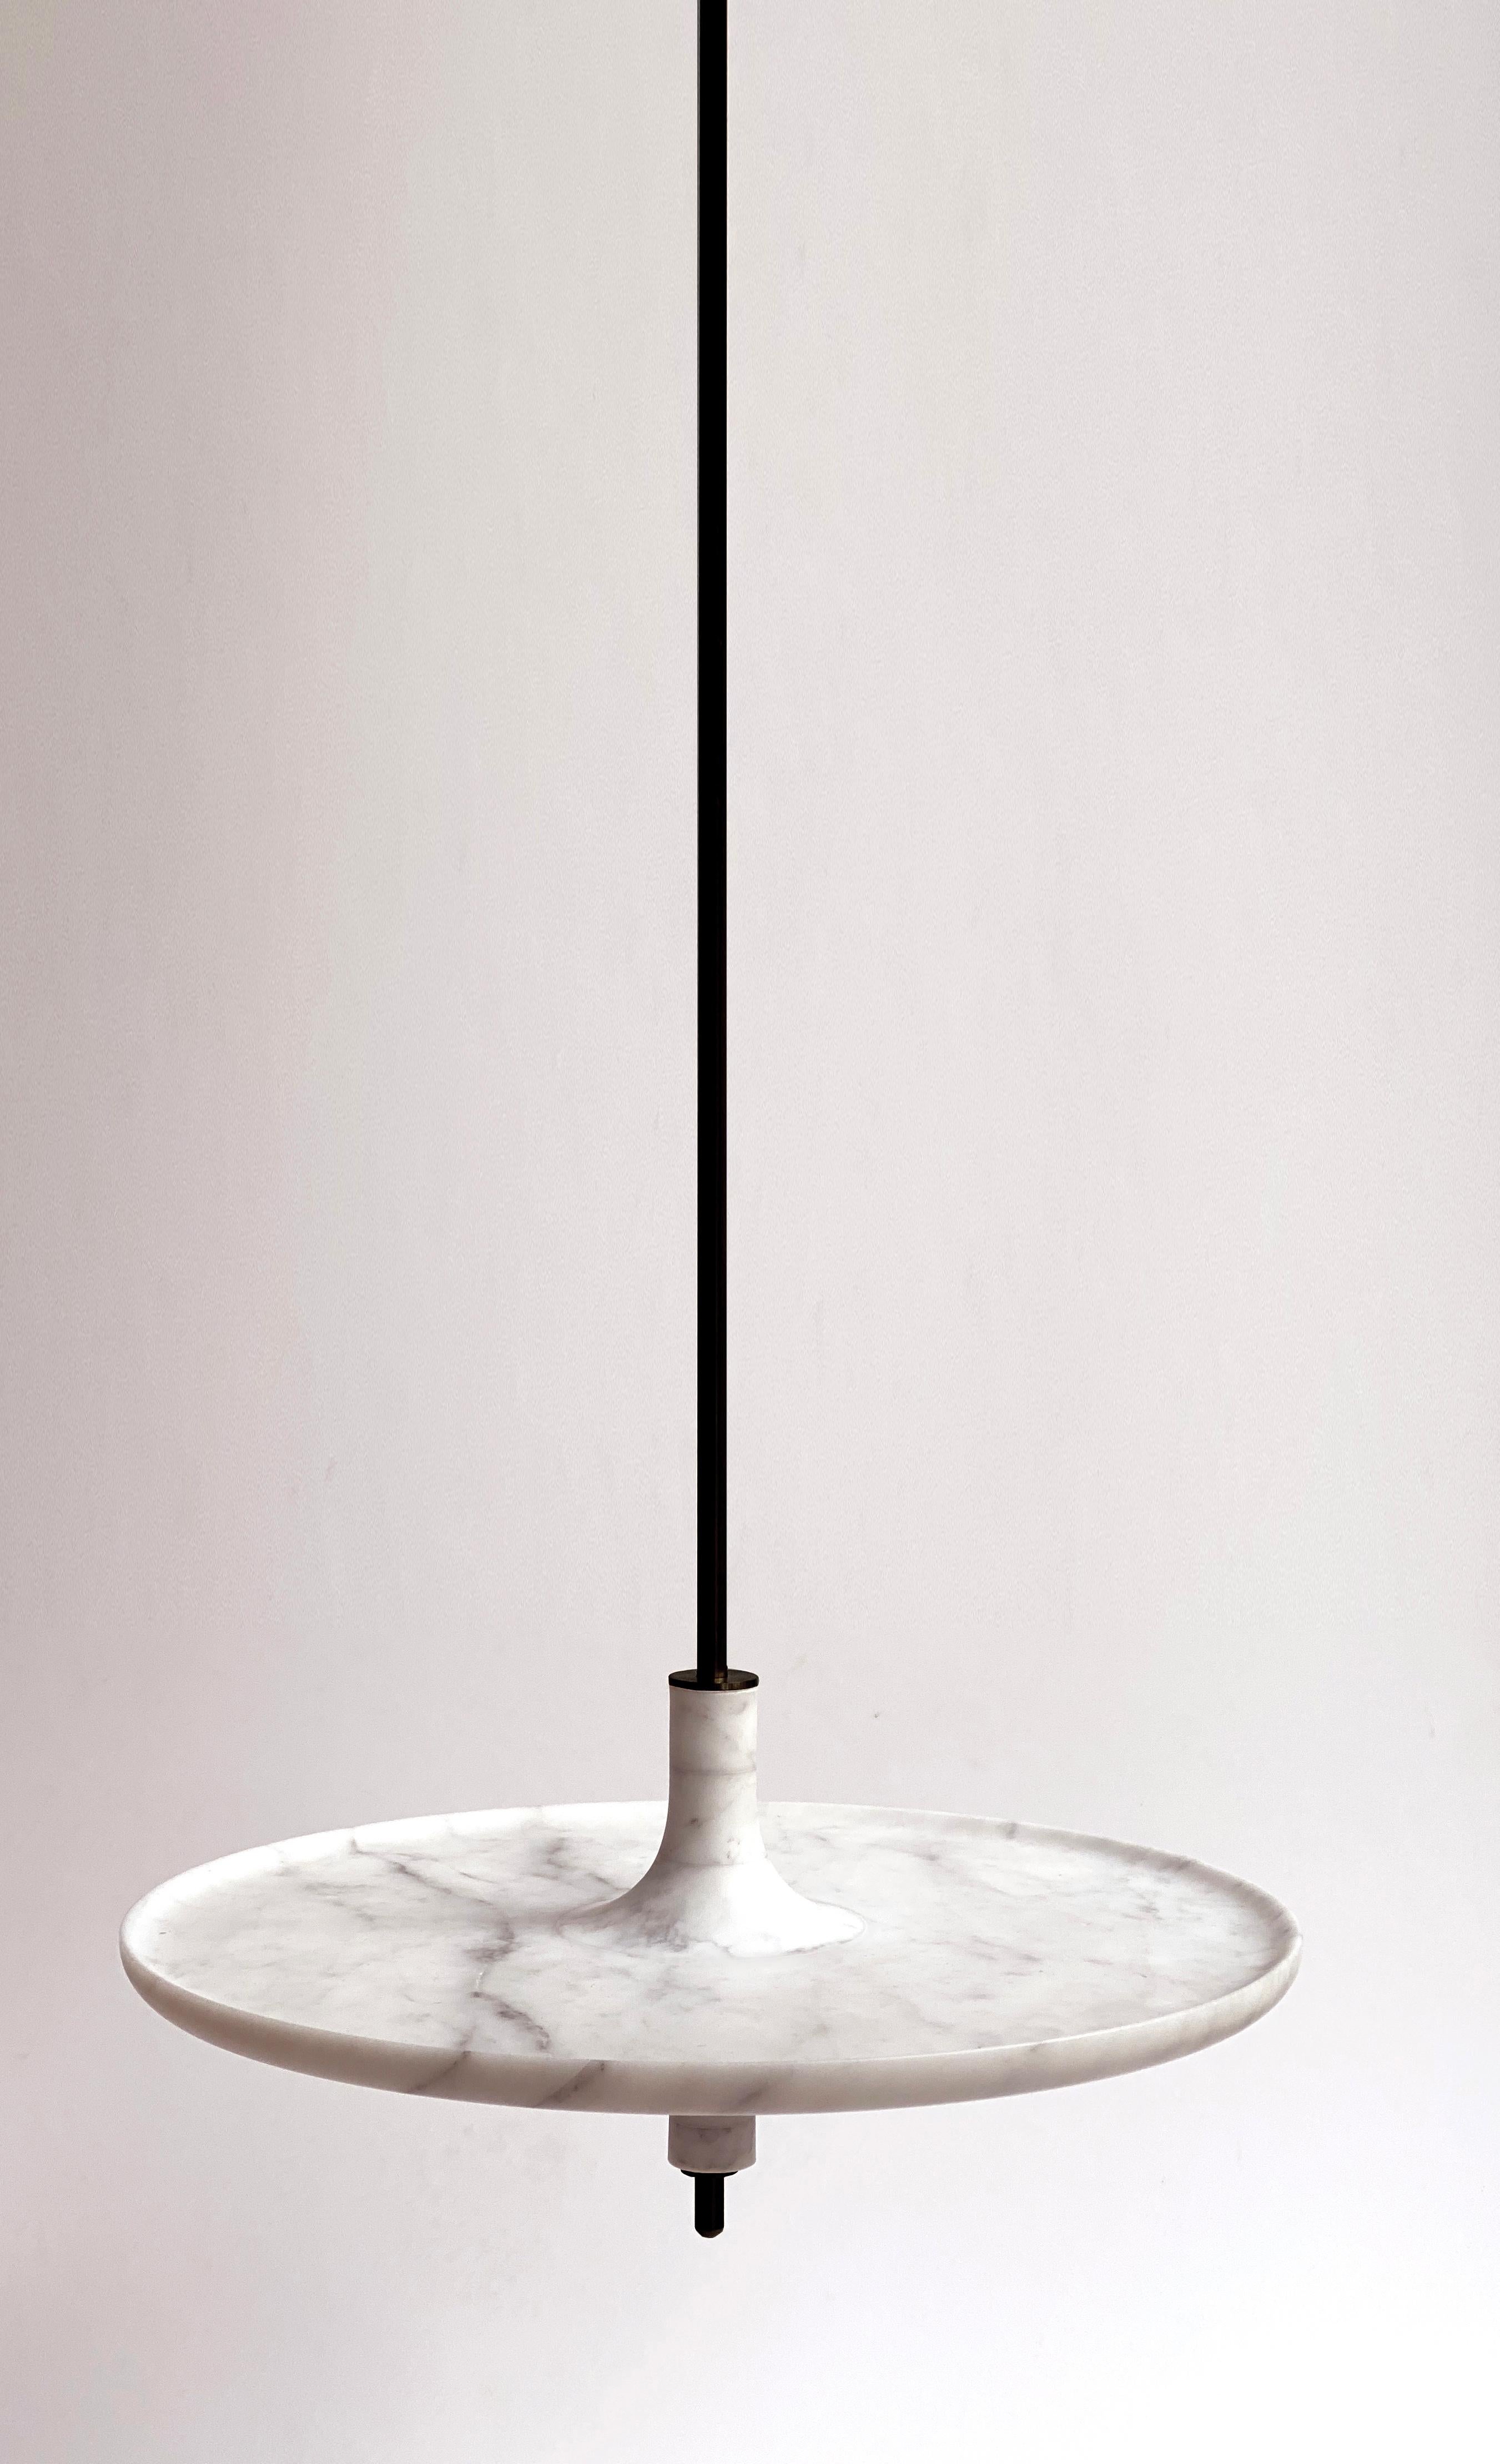 Carrara White Marble and Black Metal 38 Hanging Table by Mademoiselle Jo
Dimensions: Ø 38 x H 150 cm.
Materials: Carrara white marble and black metal.

Available in four wood colors, three marble options, two bar versions and several diameters.